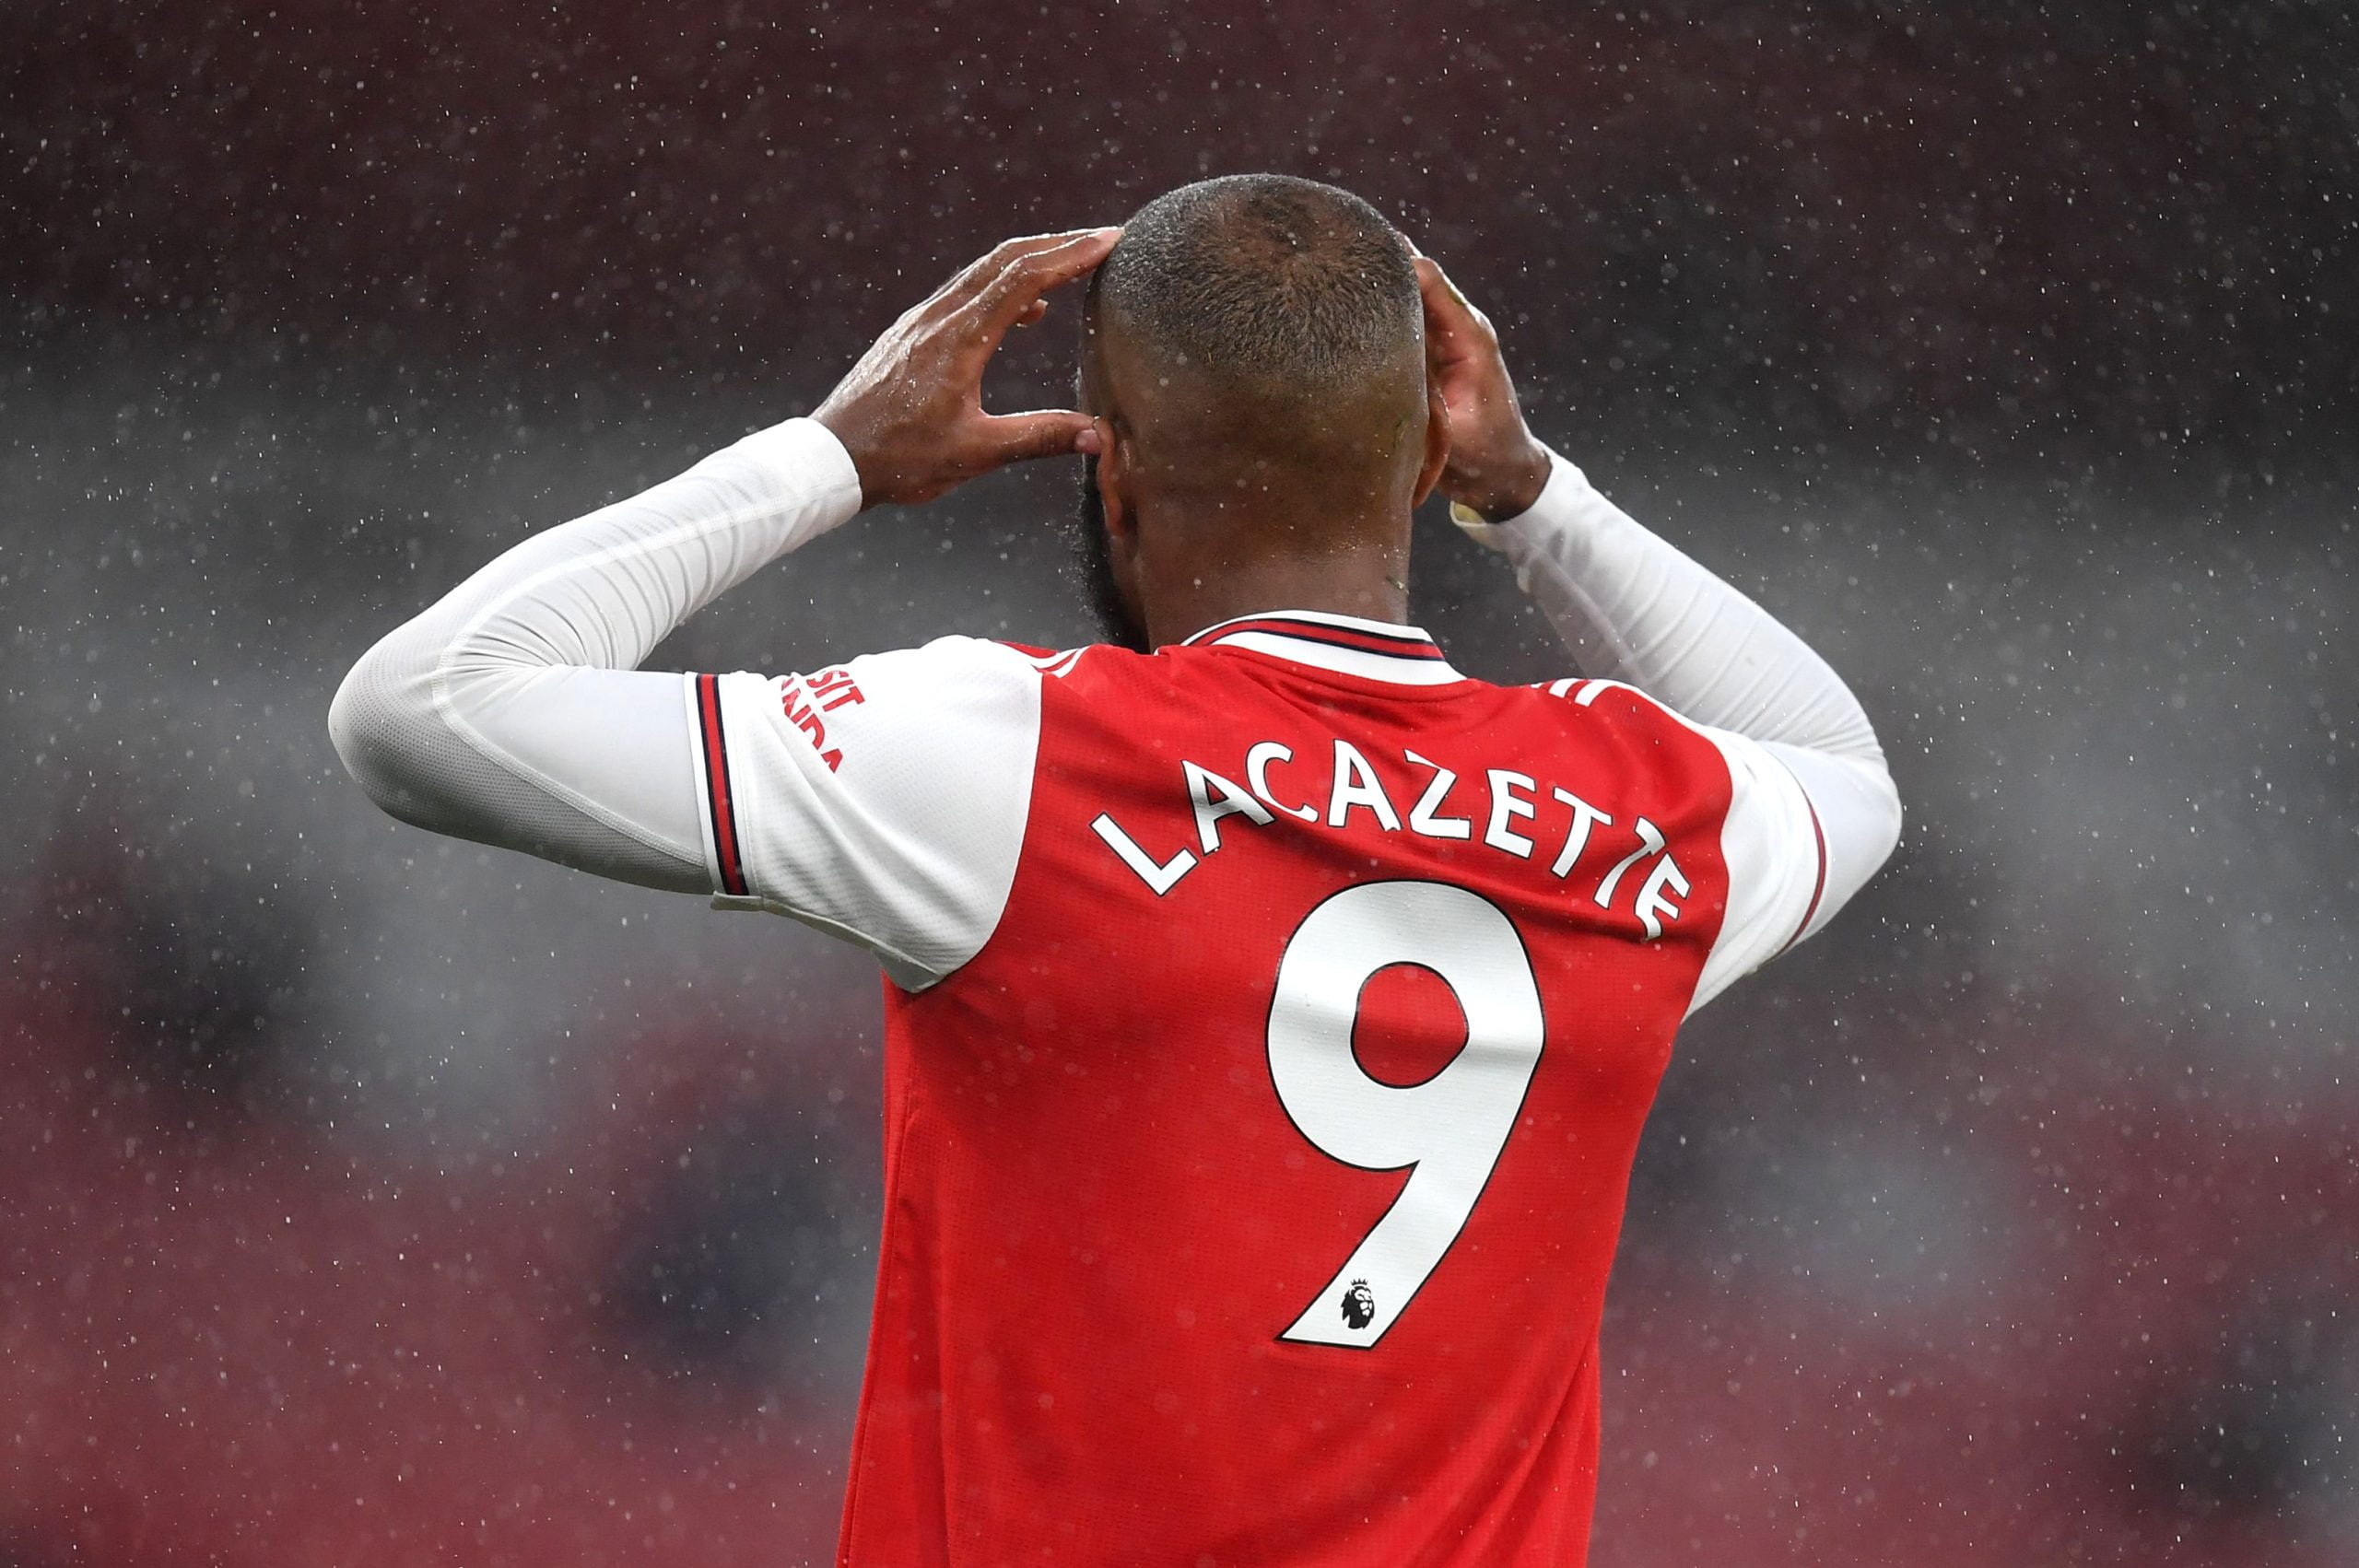 Arsenal's Alexandre Lacazette set to leave this summer (Lacazette is seen in the picture)